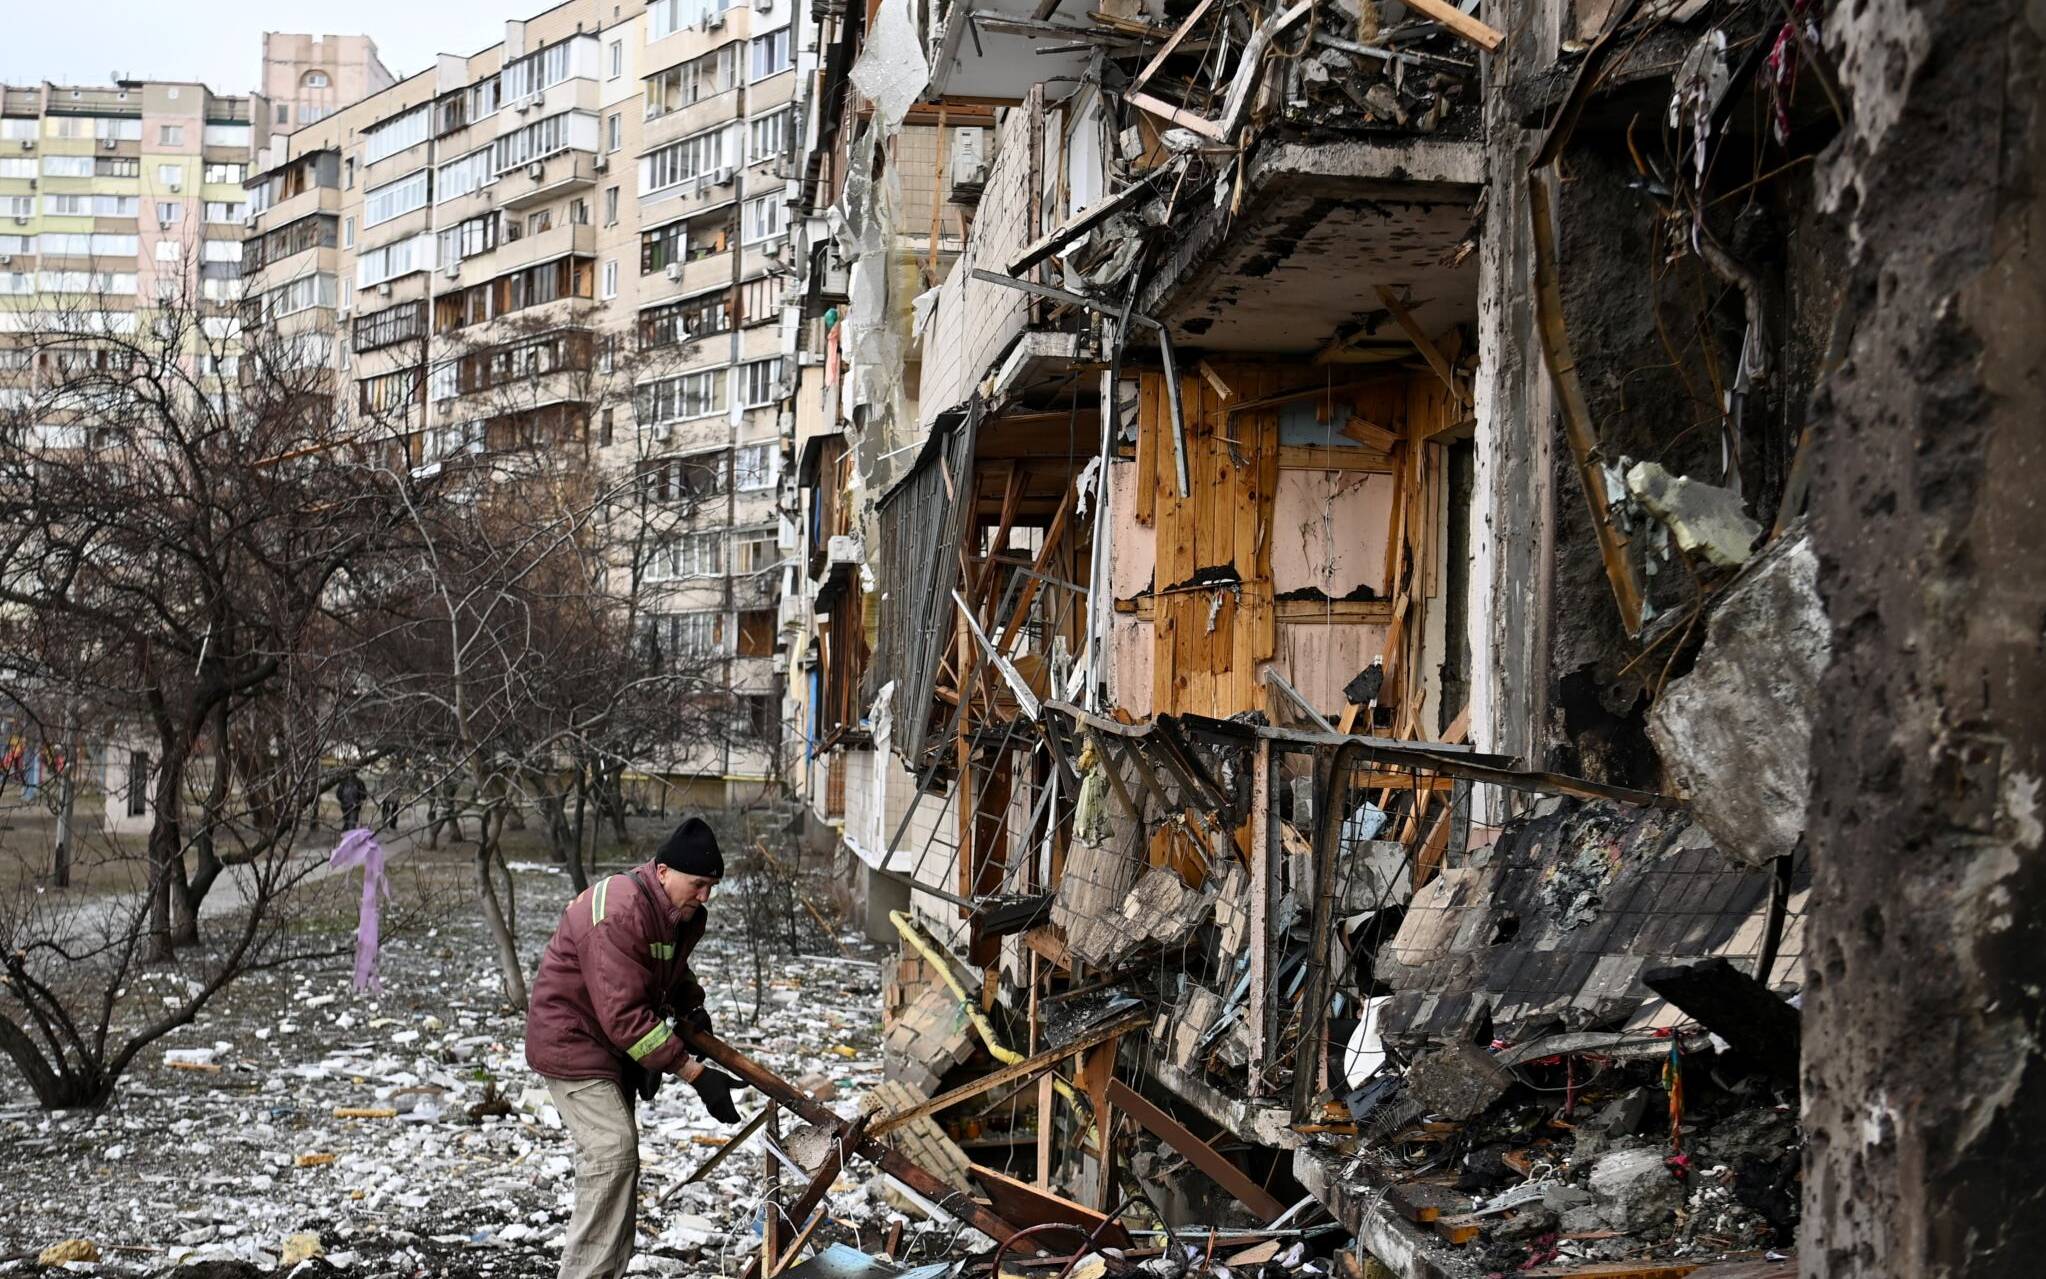 A man clears debris at a damaged residential building at Koshytsa Street, a suburb of the Ukrainian capital Kyiv, where a military shell allegedly hit, on February 25, 2022. - Russian forces reached the outskirts of Kyiv on Friday as Ukrainian President Volodymyr Zelensky said the invading troops were targeting civilians and explosions could be heard in the besieged capital. Pre-dawn blasts in Kyiv set off a second day of violence after Russian President Vladimir Putin defied Western warnings to unleash a full-scale ground invasion and air assault on Thursday that quickly claimed dozens of lives and displaced at least 100,000 people. (Photo by Daniel LEAL / AFP)